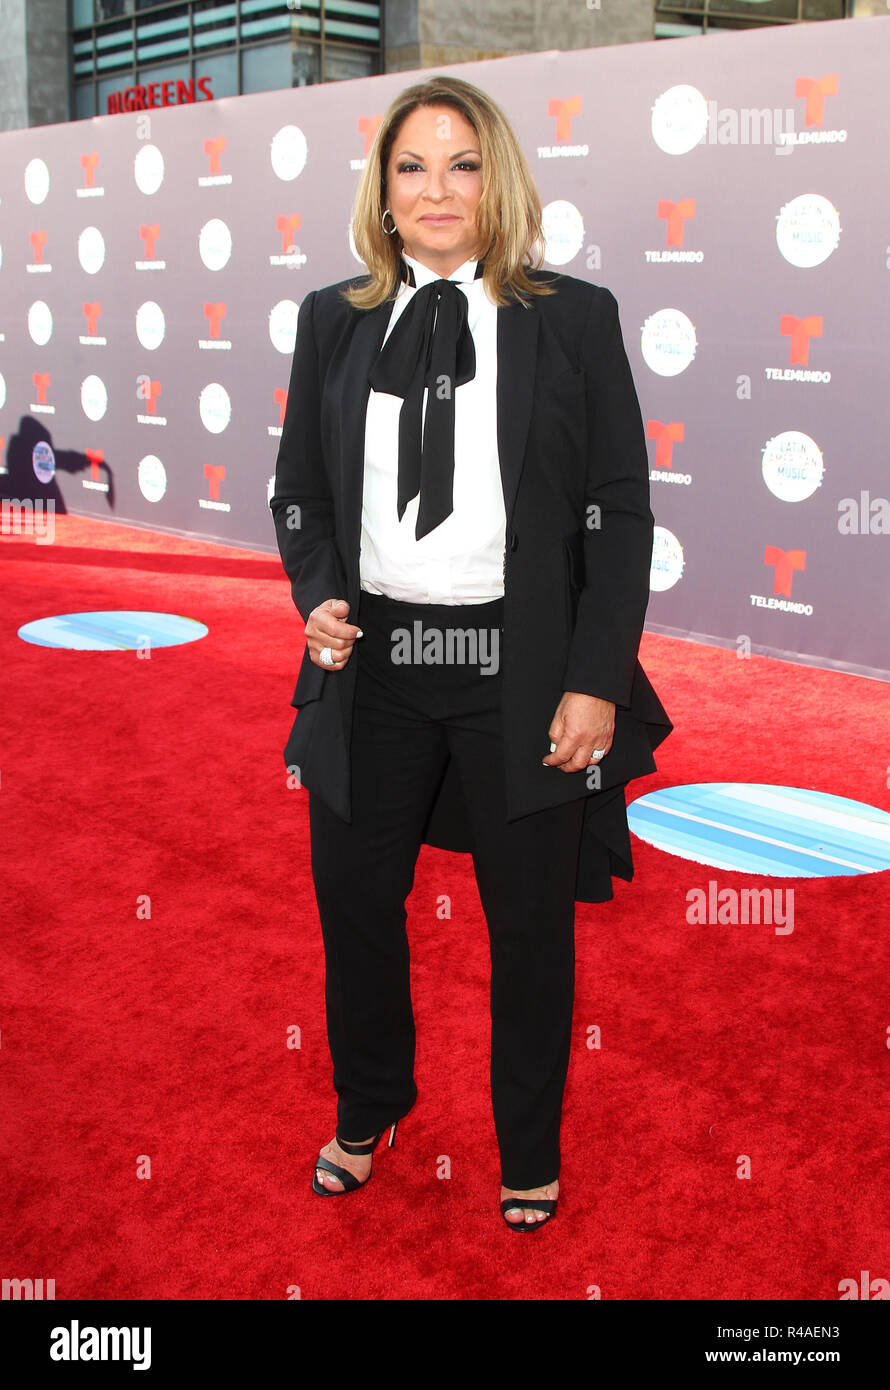 Latin American Music Awards 2018 held at the Dolby Theatre in Los Angeles, California.  Featuring: Doctora Ana Maria Polo Where: Los Angeles, California, United States When: 25 Oct 2018 Credit: Adriana M. Barraza/WENN.com Stock Photo